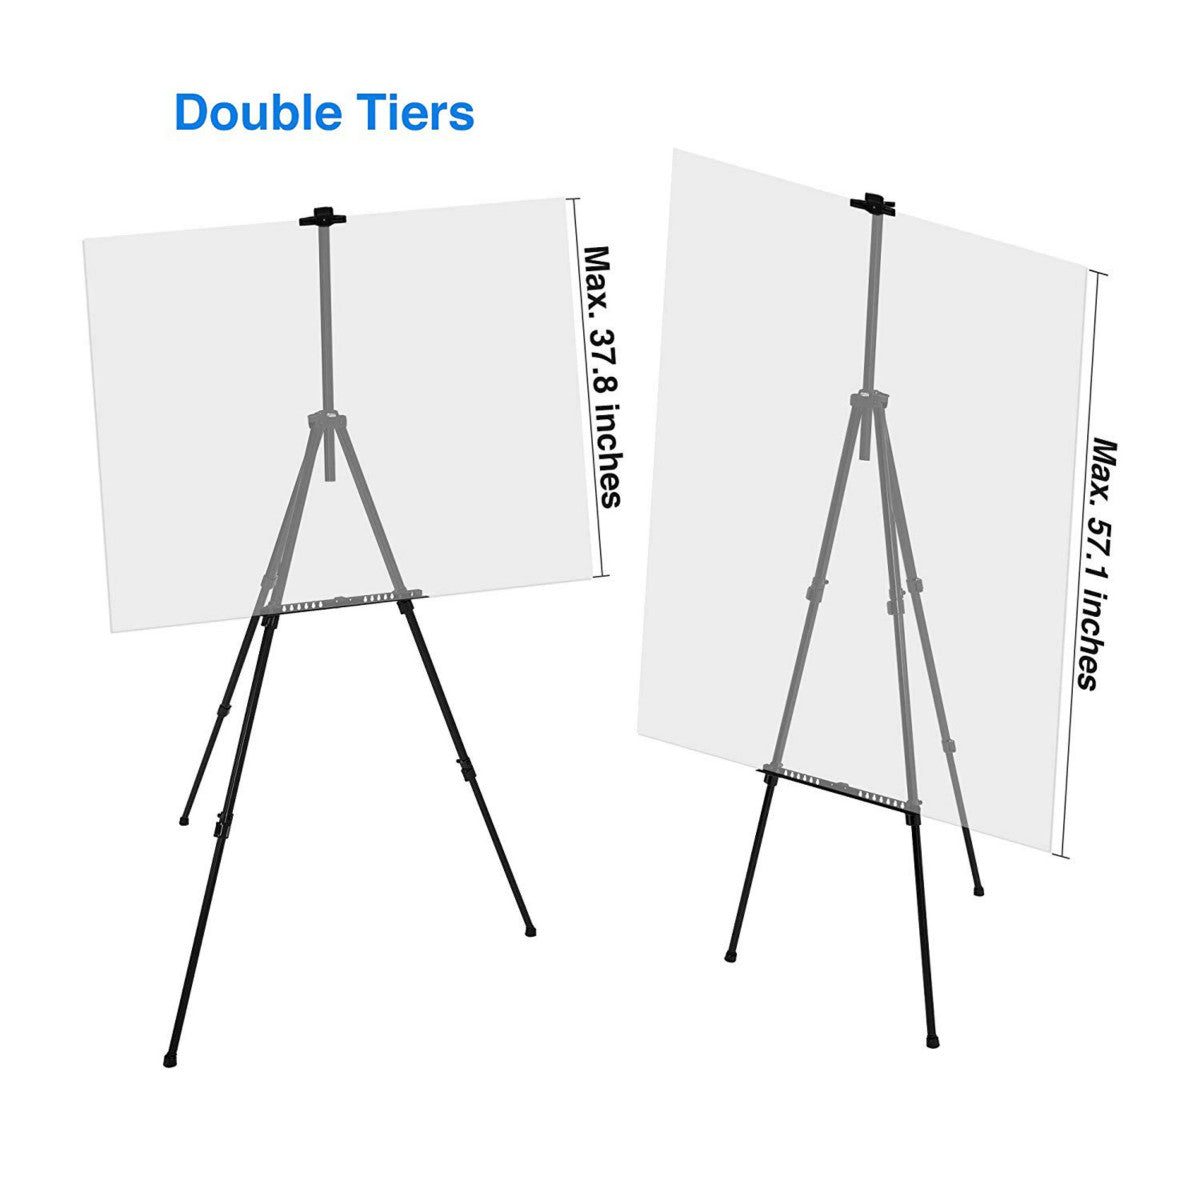 Creative Mark Thrifty Wood Tripod Display Easel Stand for Painting Single  Unit - Durable Light Weight, Adjustable Angle for Drawing and Painting -  Mahogany Finish - Ideal For Artist 